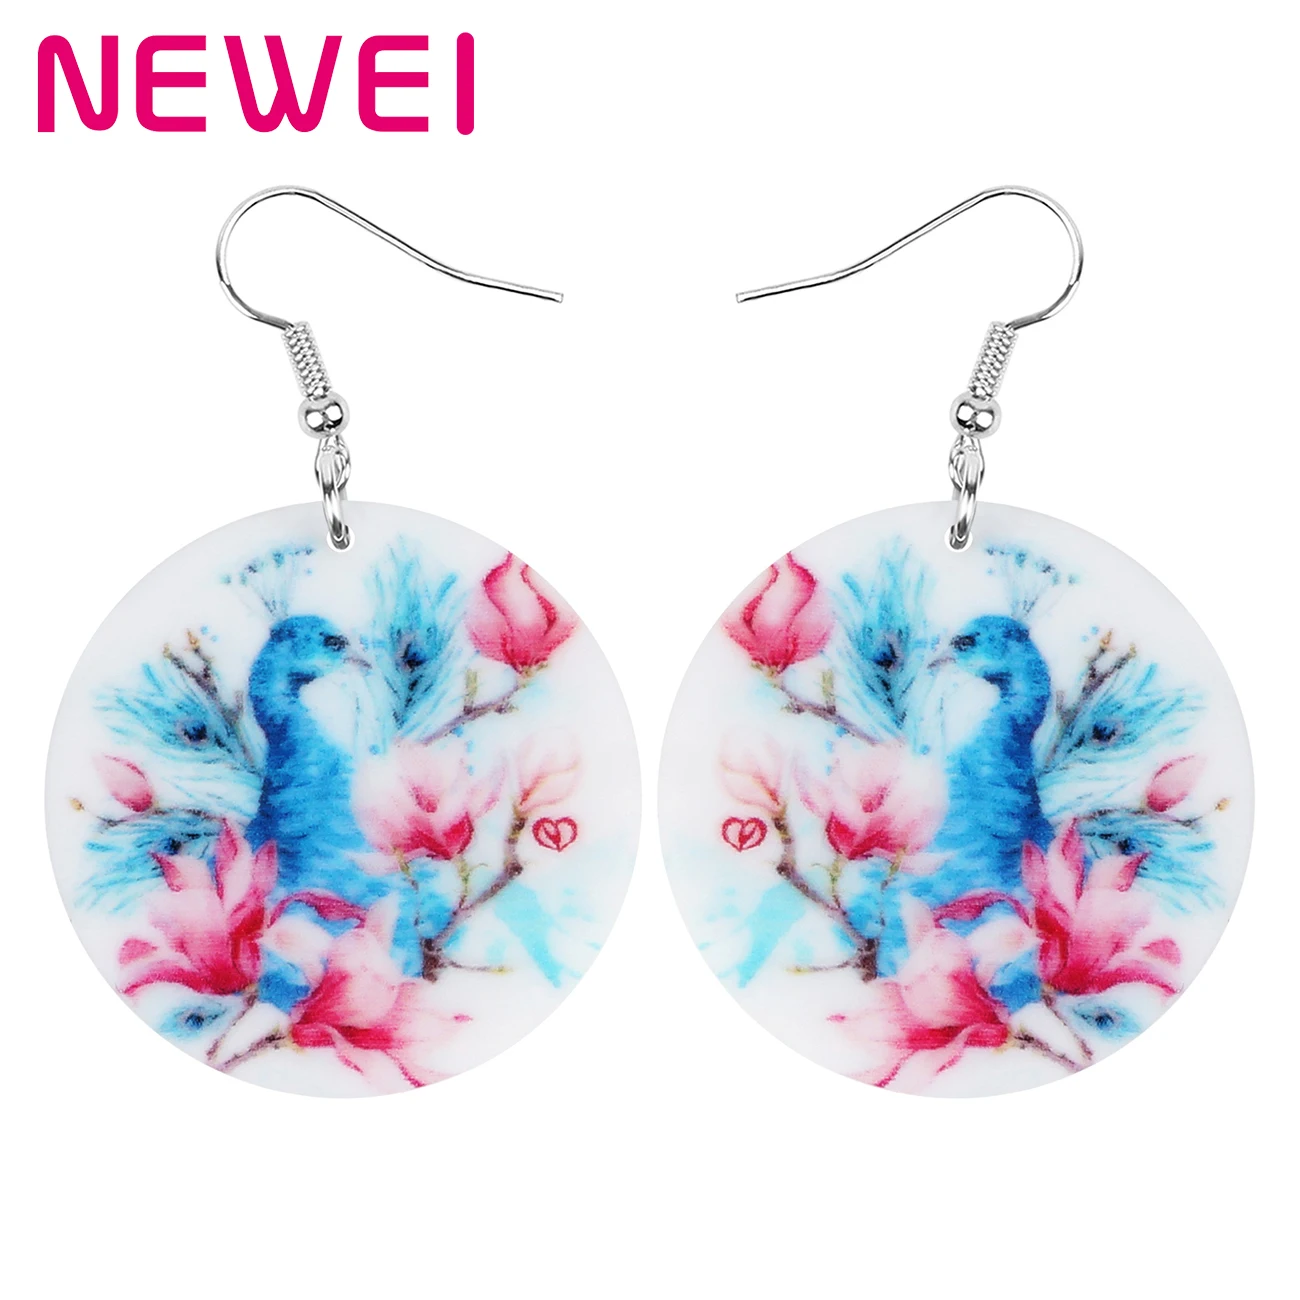 

Acrylic Round Flower Peacock Peafowl Earrings Animals Drop Dangle Fashion Jewelry For Women Girls Teens Novelty Charms Gifts, Multicolor